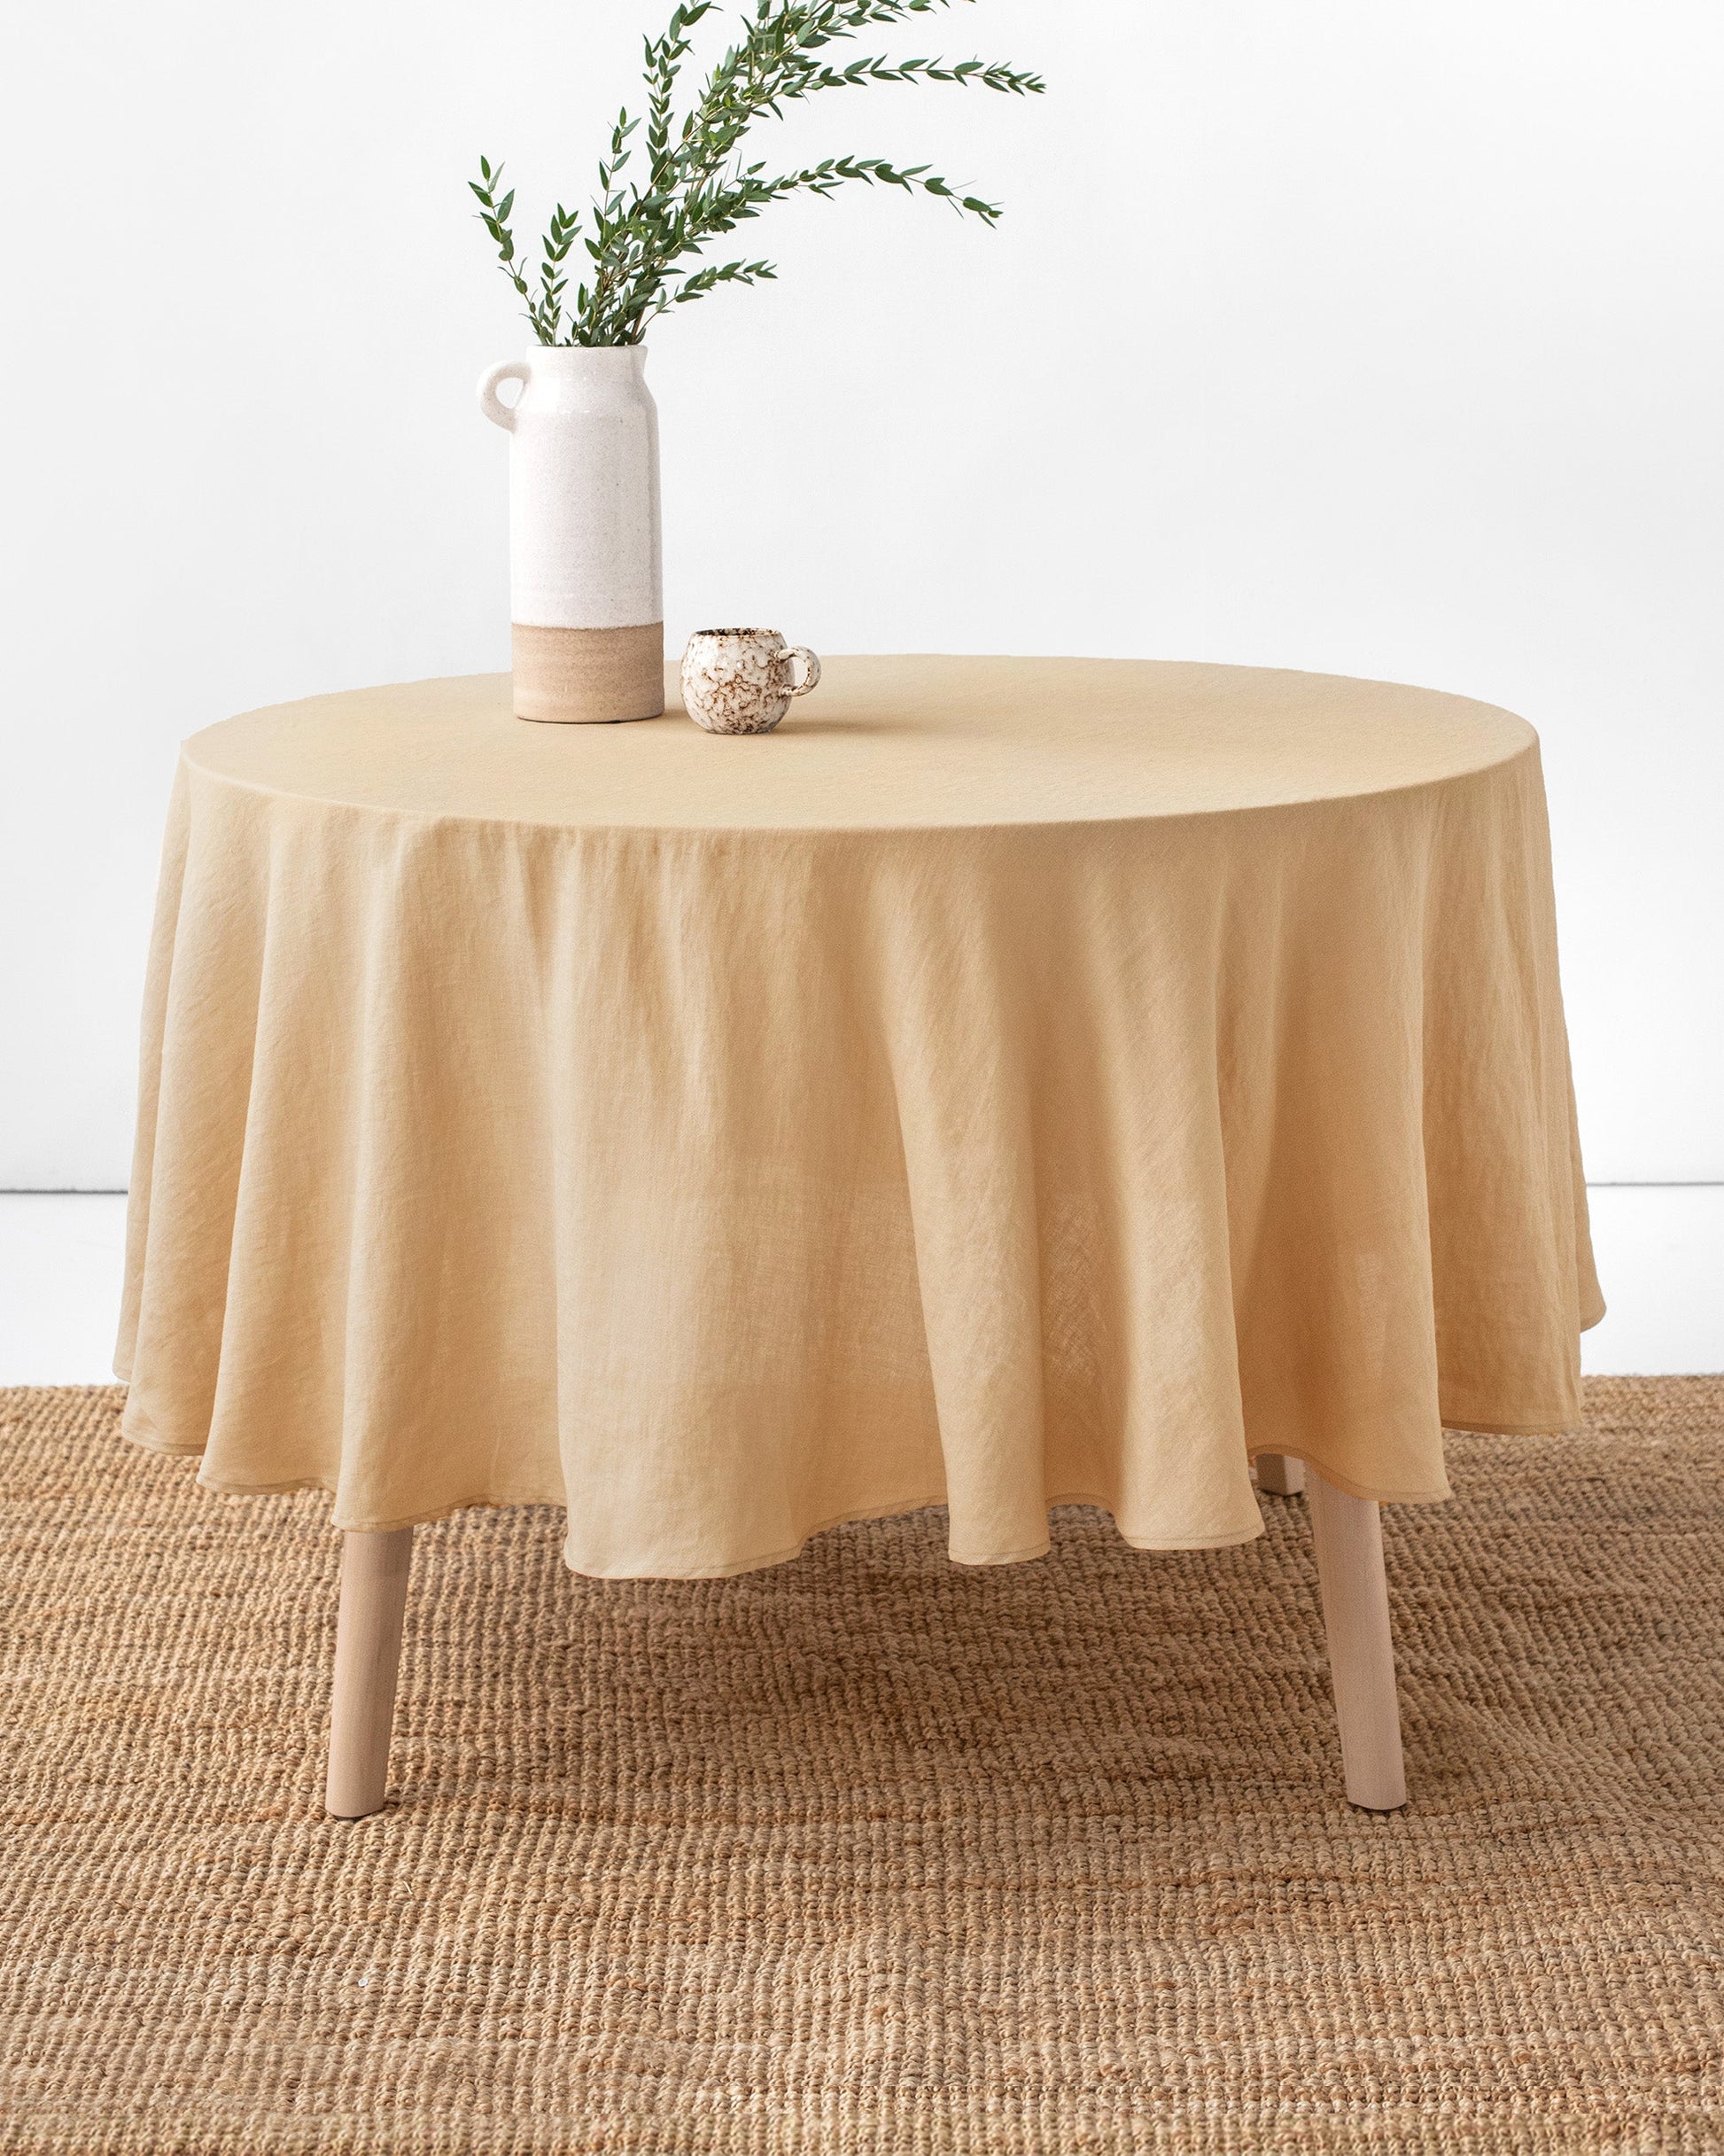 Custom size round linen tablecloth in Sandy beige - MagicLinen